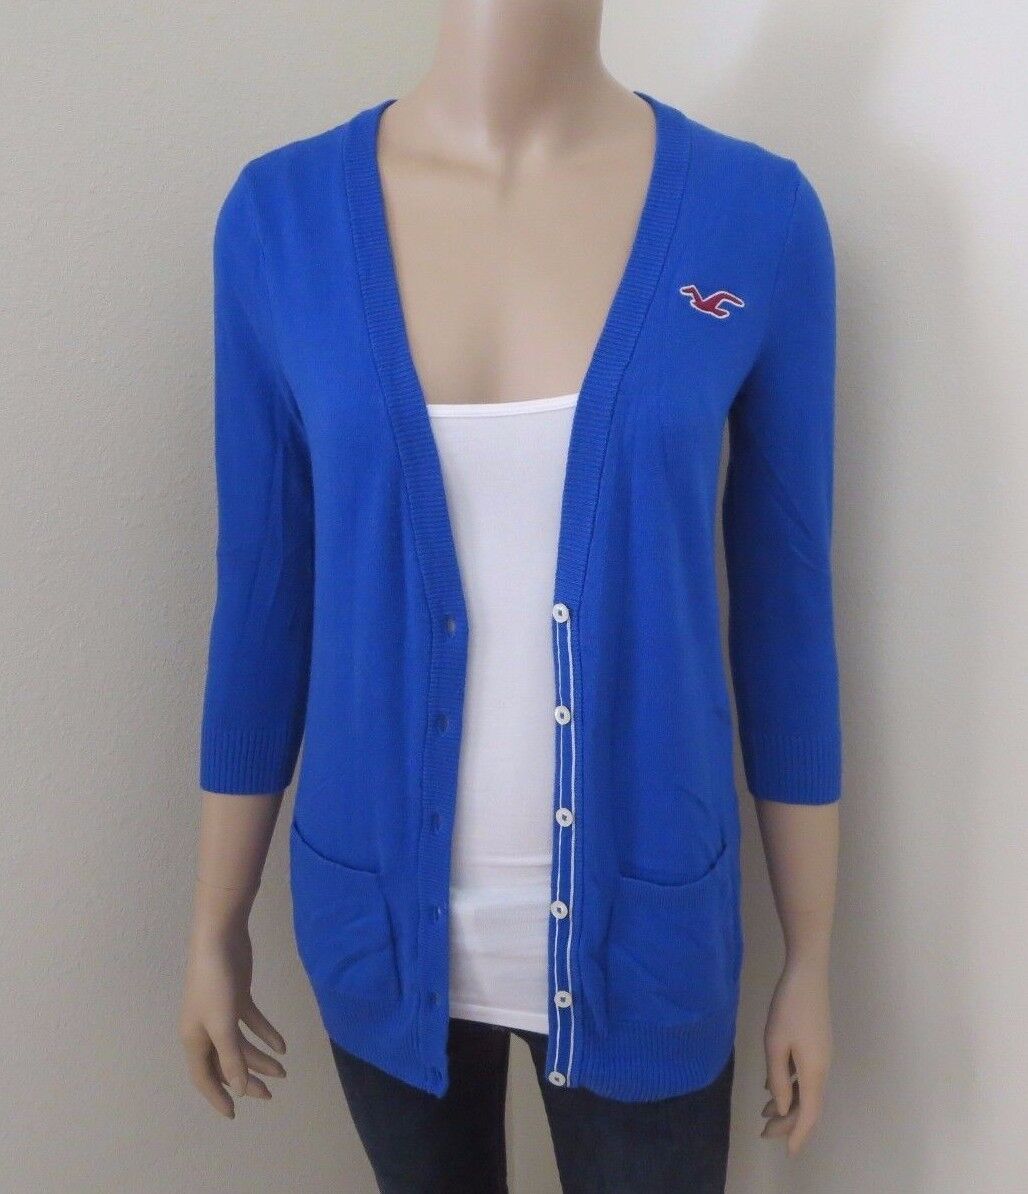 Hollister Womens V-Neck Cardigan Size Small Sweater Top Shirt Blue